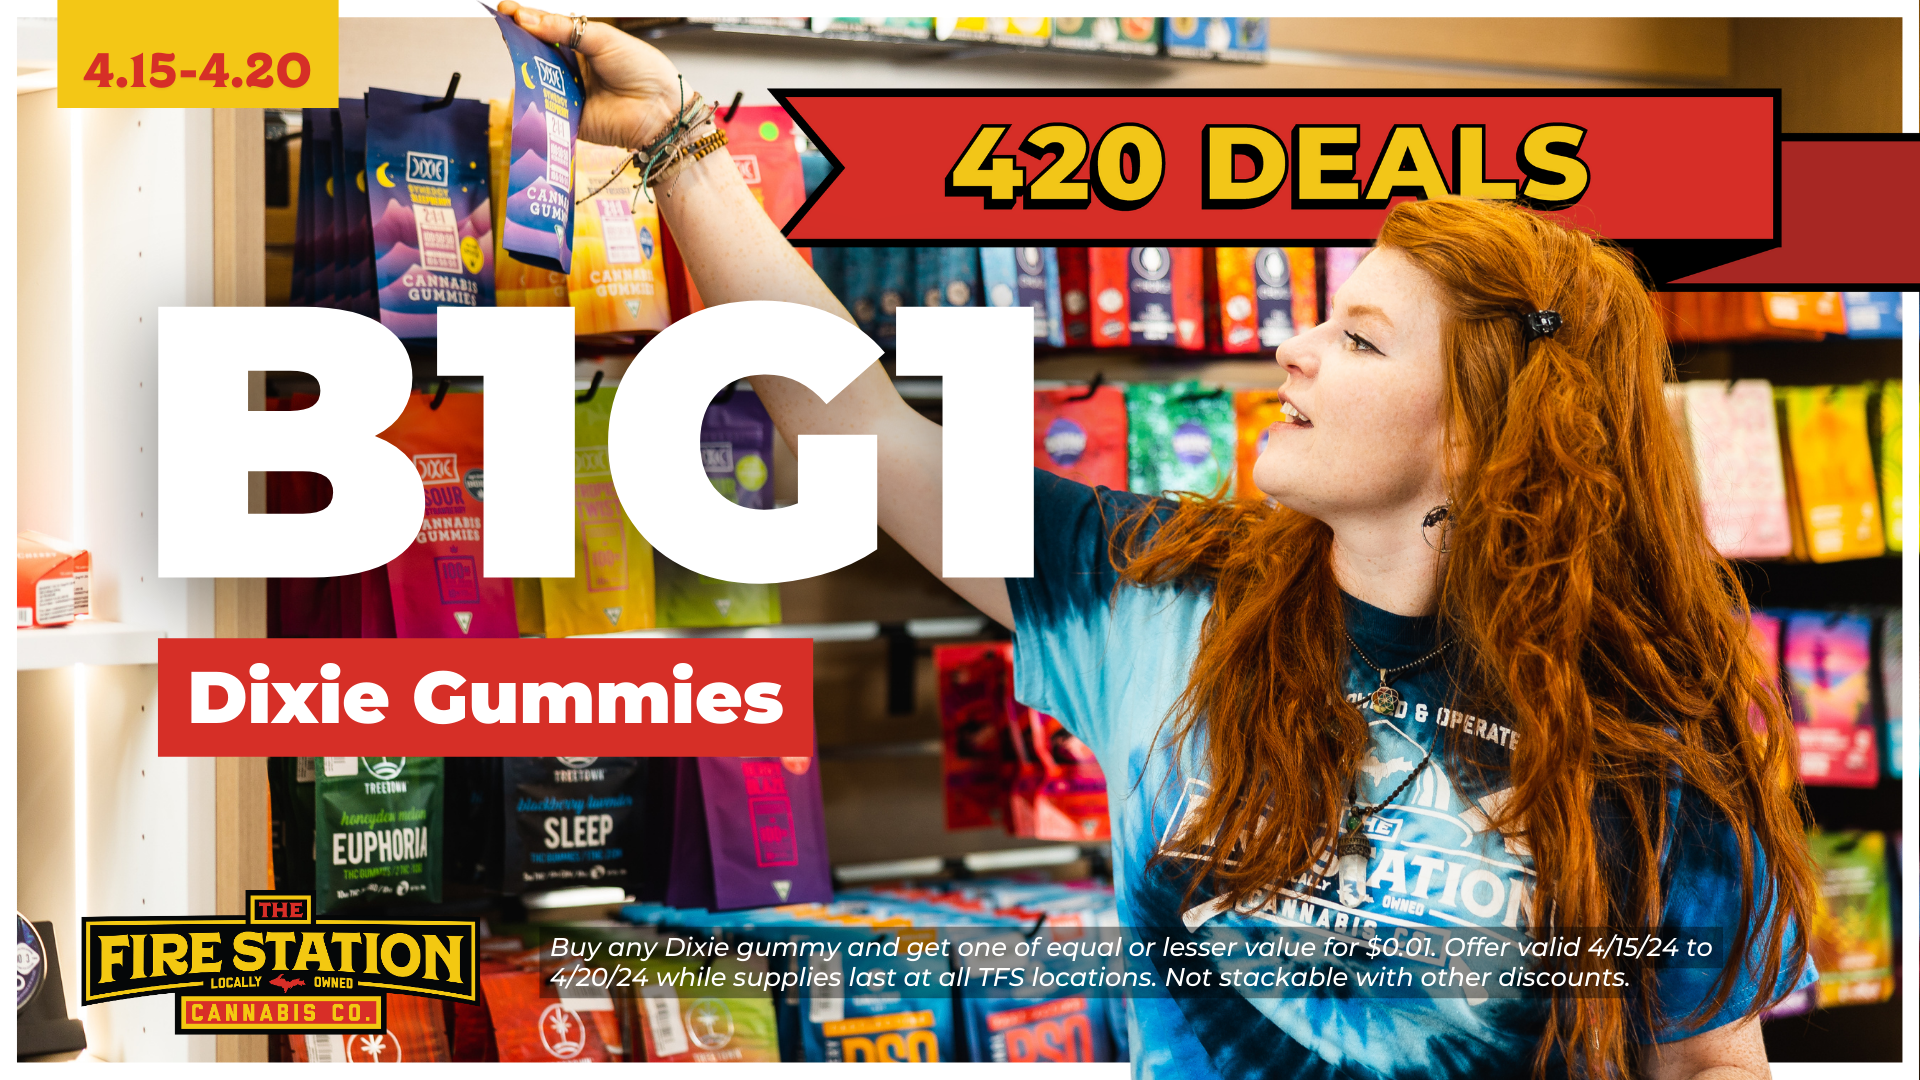 Buy any Dixie gummy and get one of equal or lesser value for $0.01. Offer valid 4/15/24 to 4/20/24 while supplies last at all TFS locations. Not stackable with other discounts.